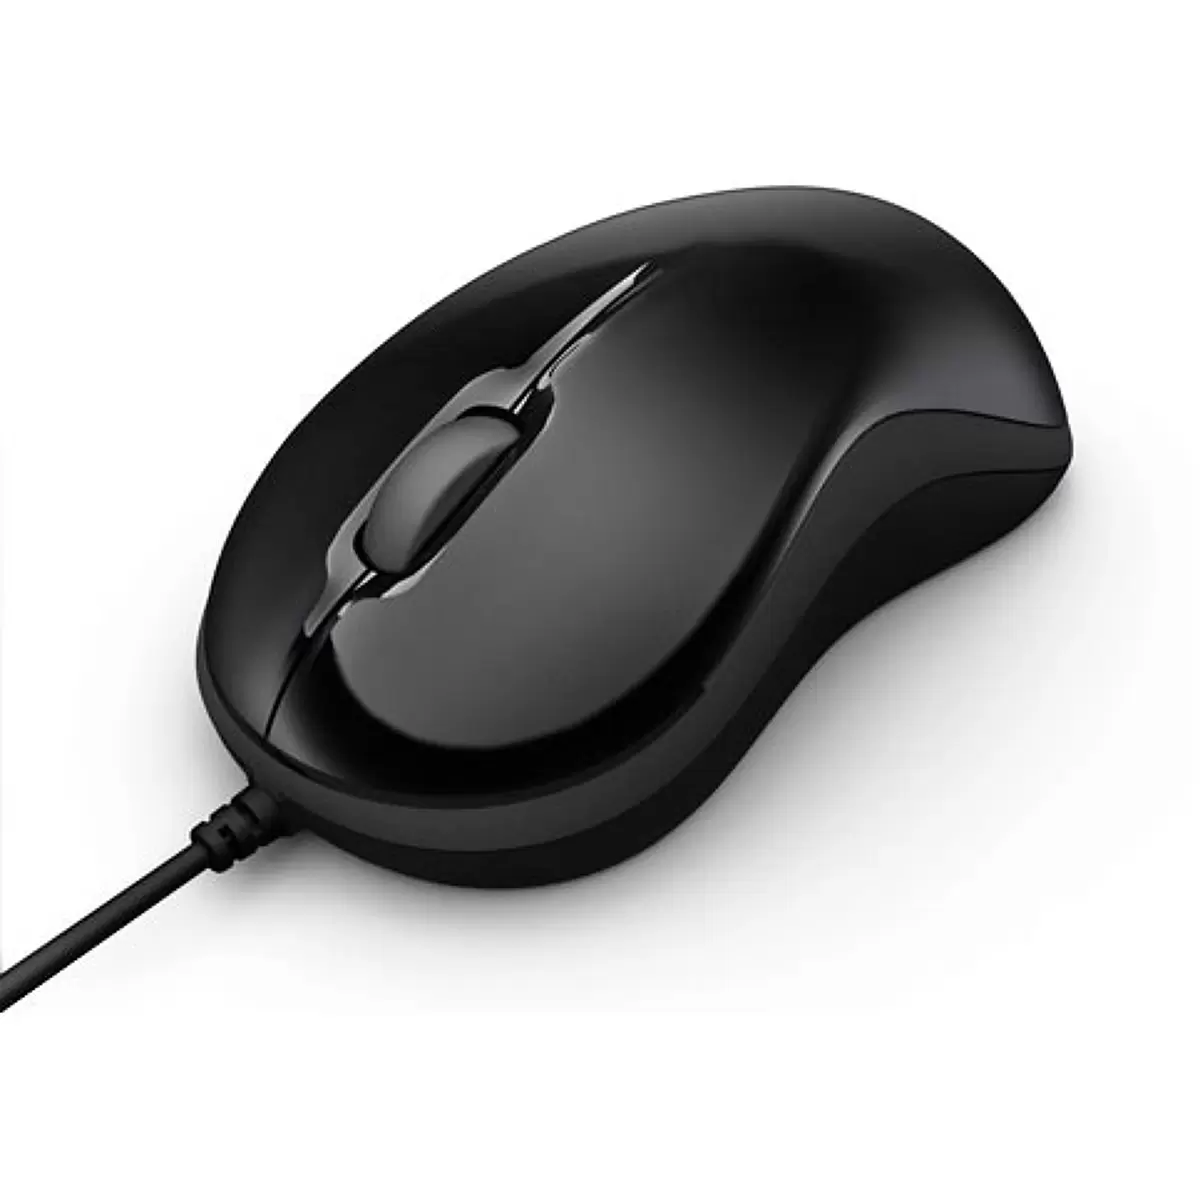 GIGABYTE GM-M5050 Optical Wired Mouse